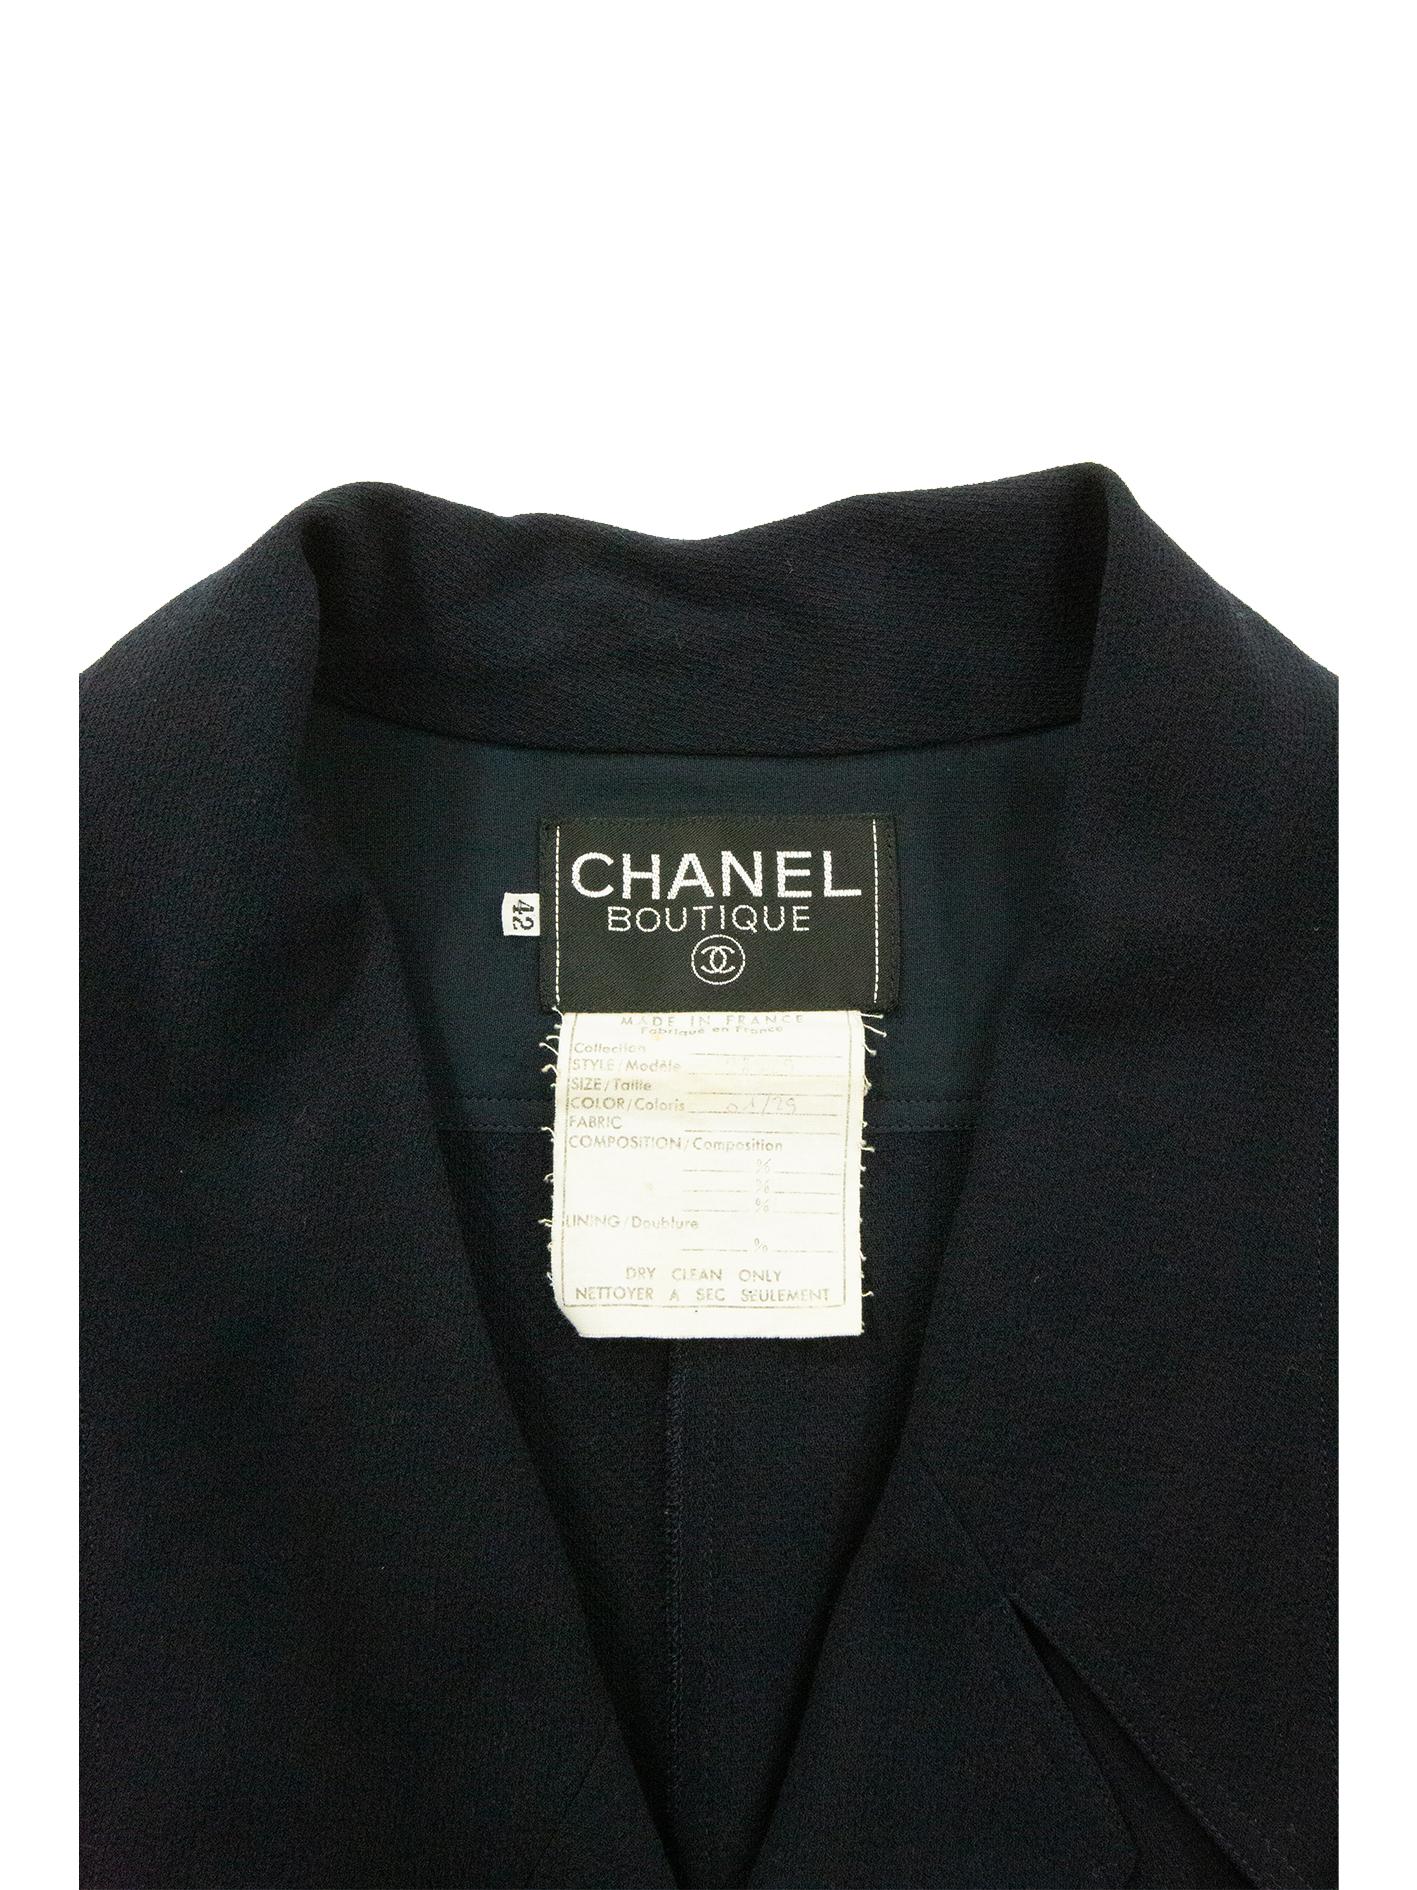 Late 80s Asymmetrical Chanel Jacket With Chiffon Sleeves For Sale 1